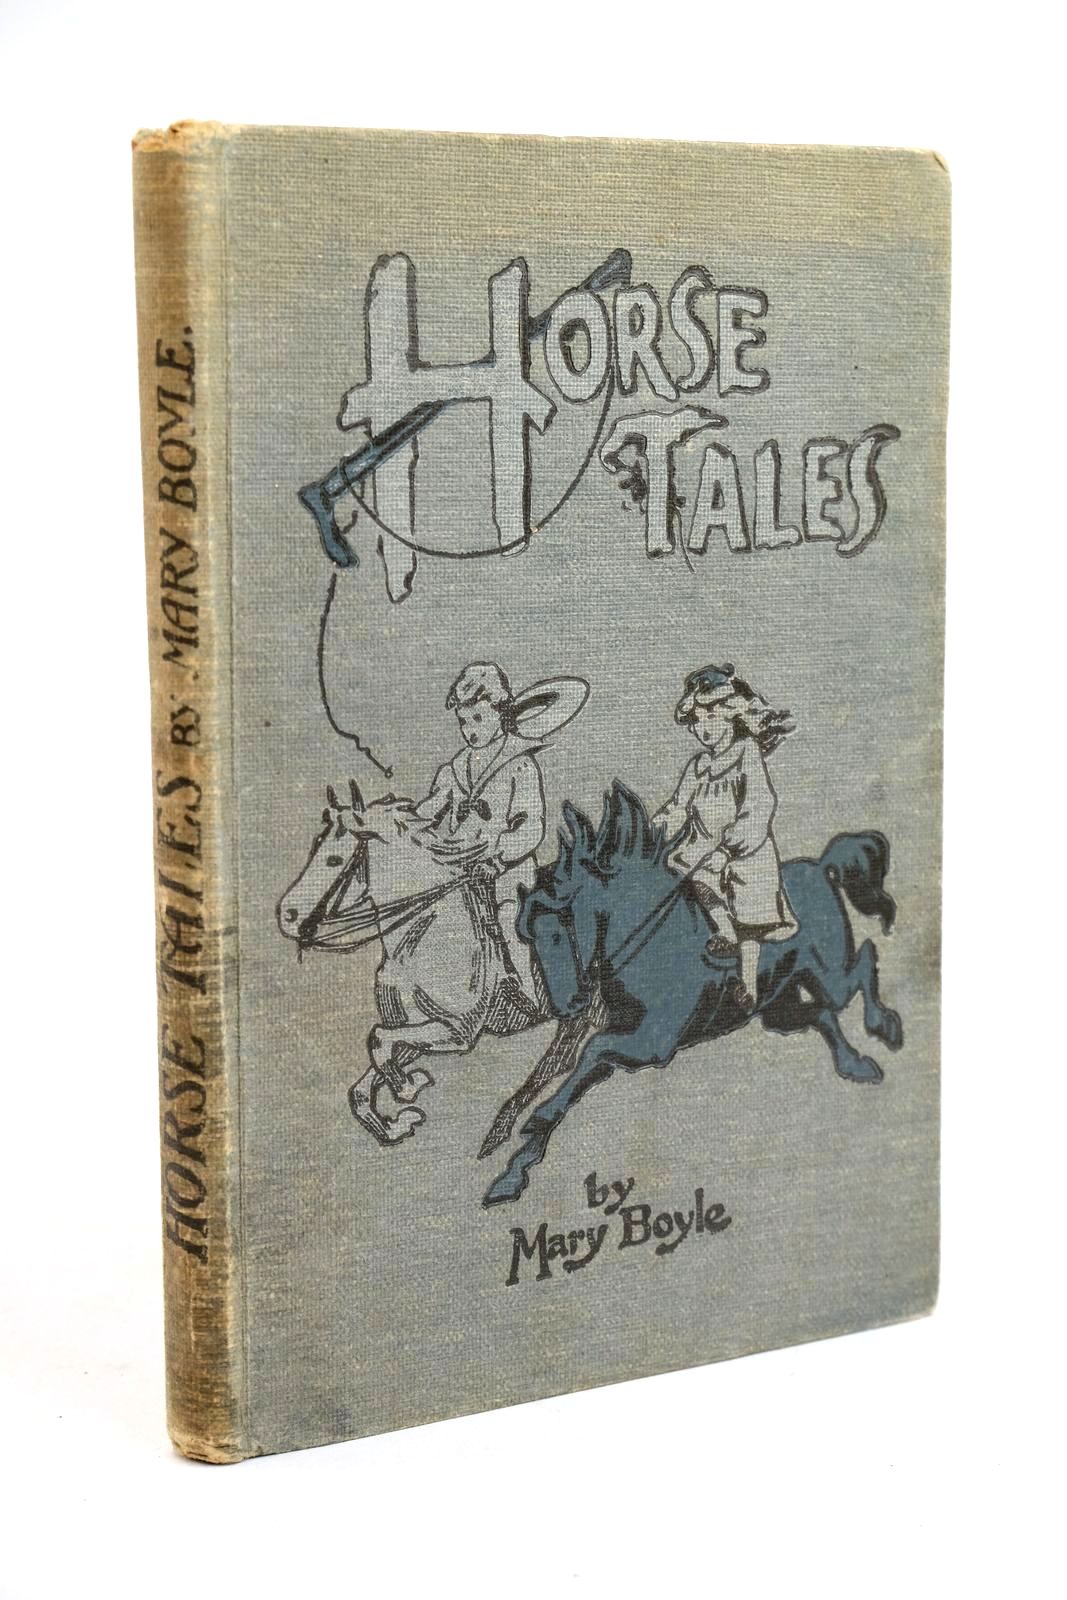 Photo of HORSE TALES written by Boyle, Mary illustrated by Watkin, Isabel et al., published by Ernest Nister (STOCK CODE: 1321520)  for sale by Stella & Rose's Books